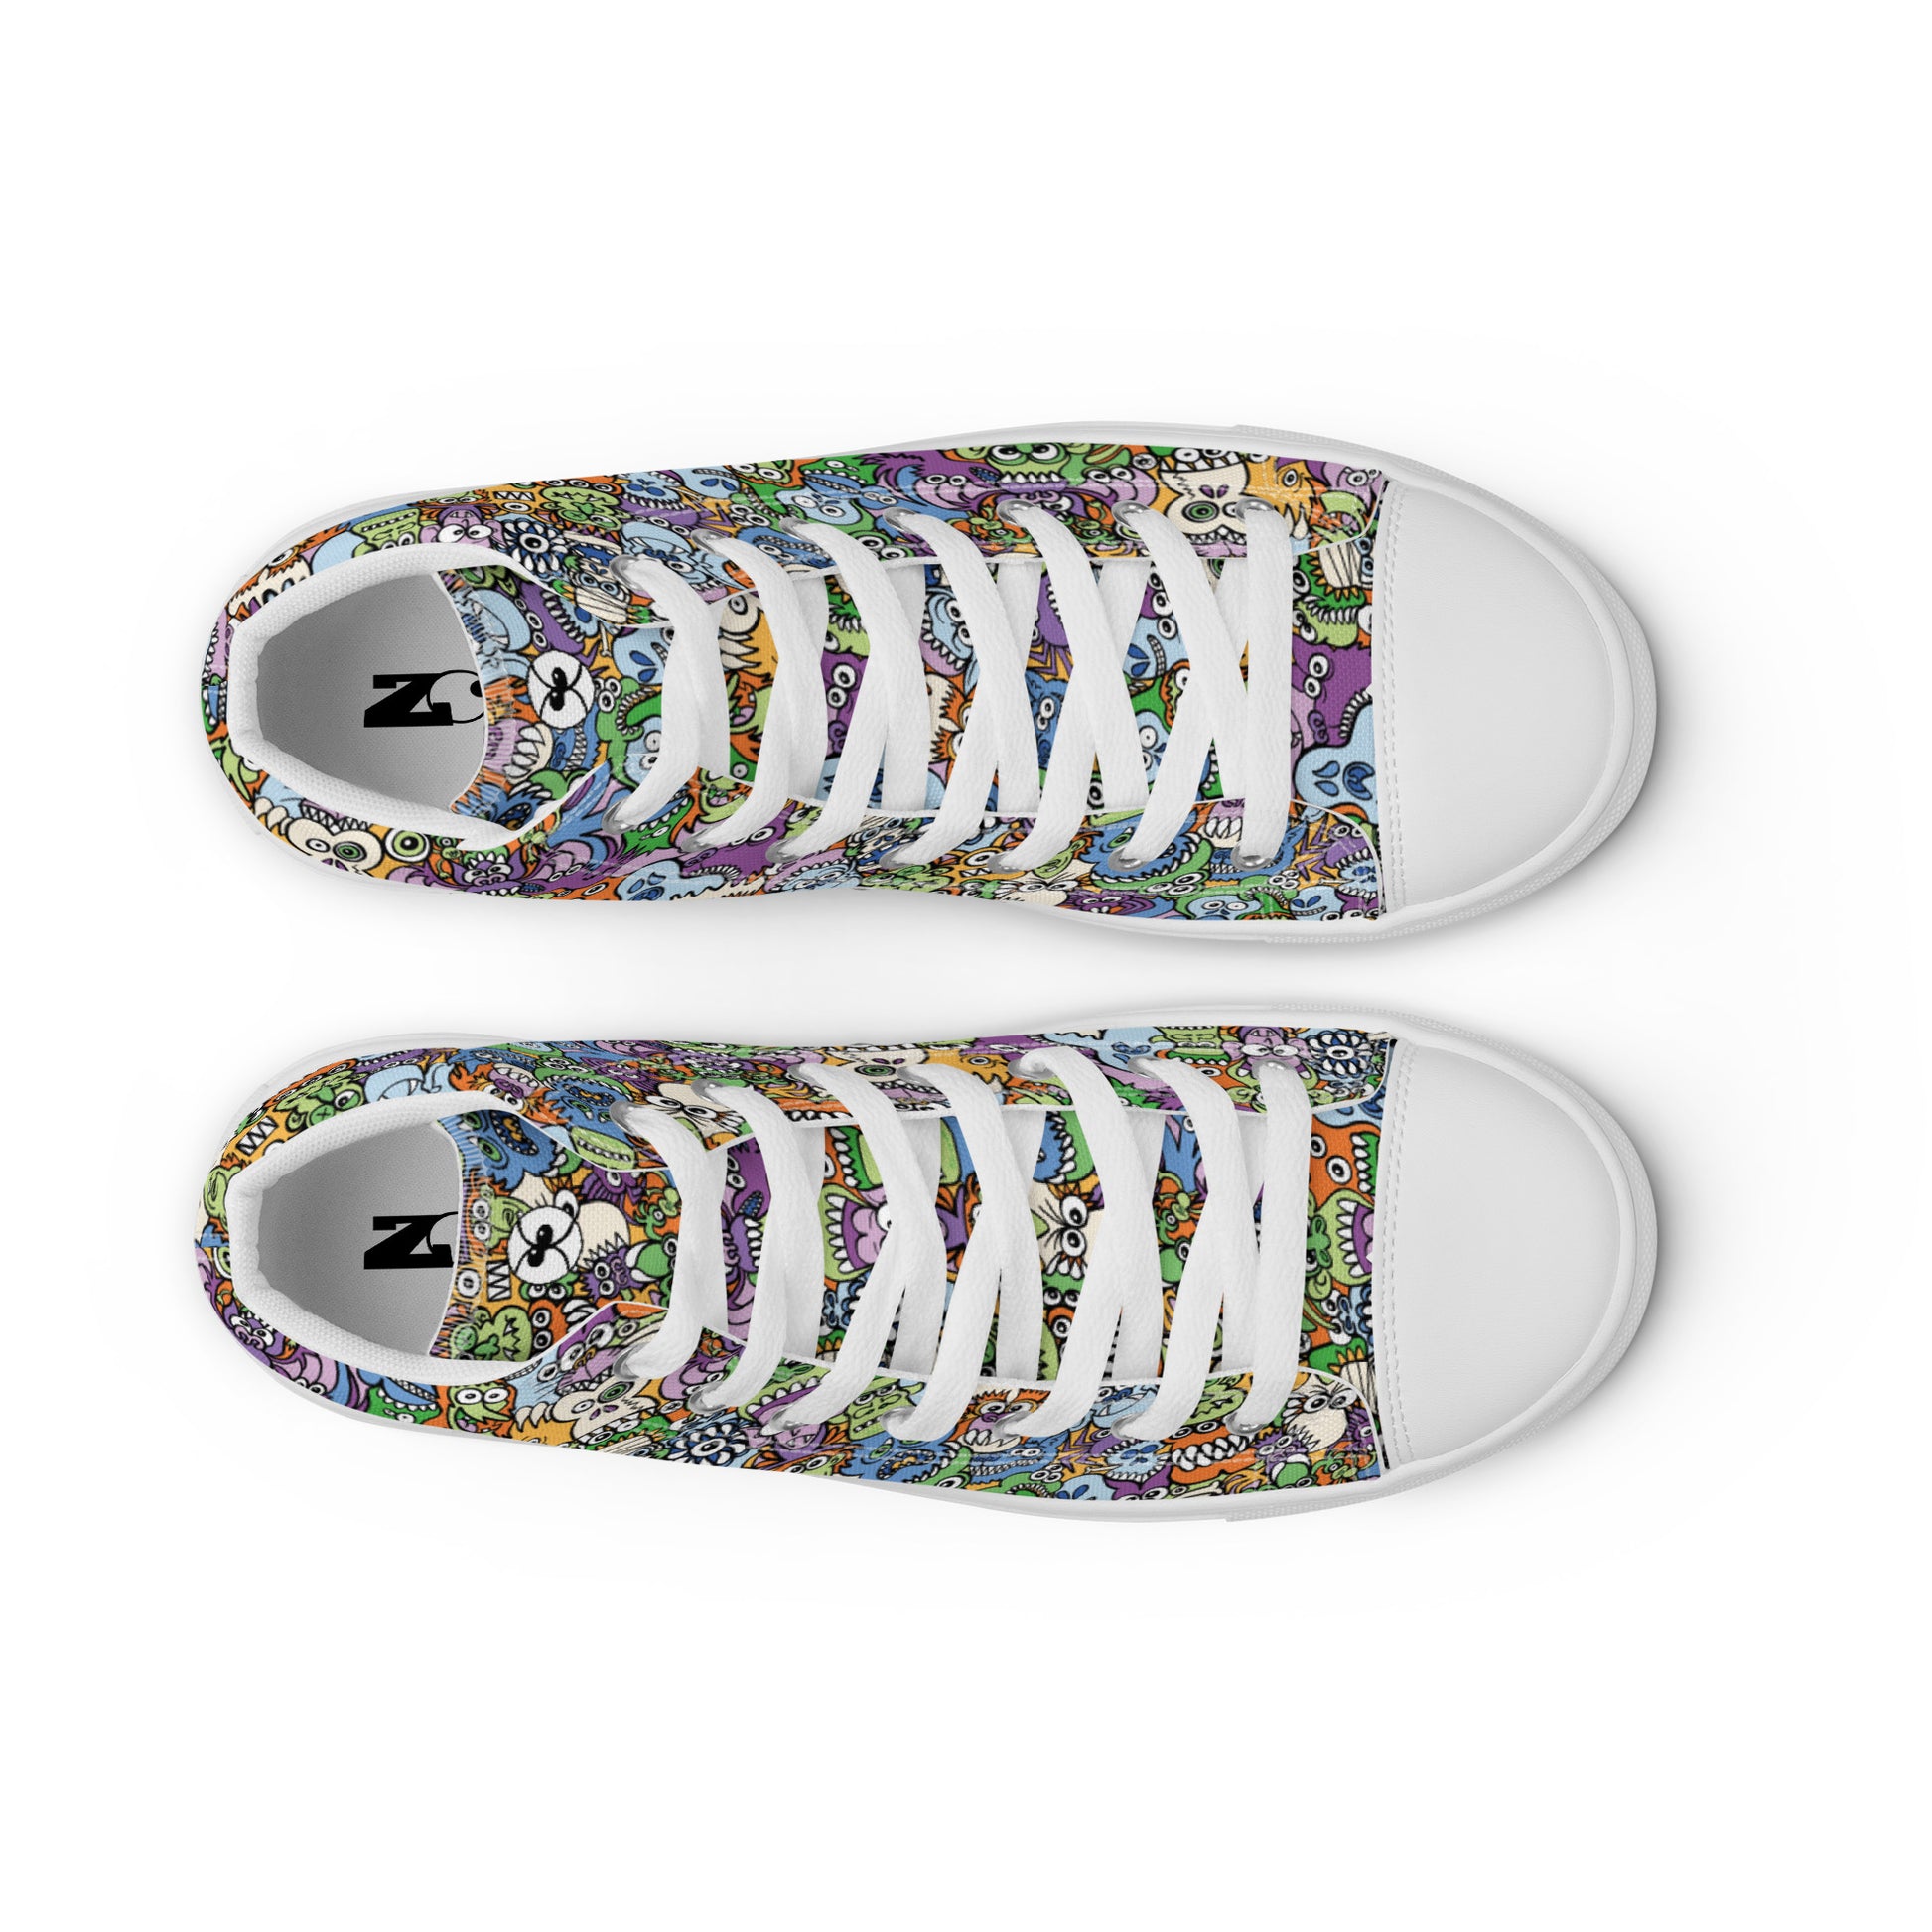 All the spooky Halloween monsters in a pattern design Men’s high top canvas shoes. Top view